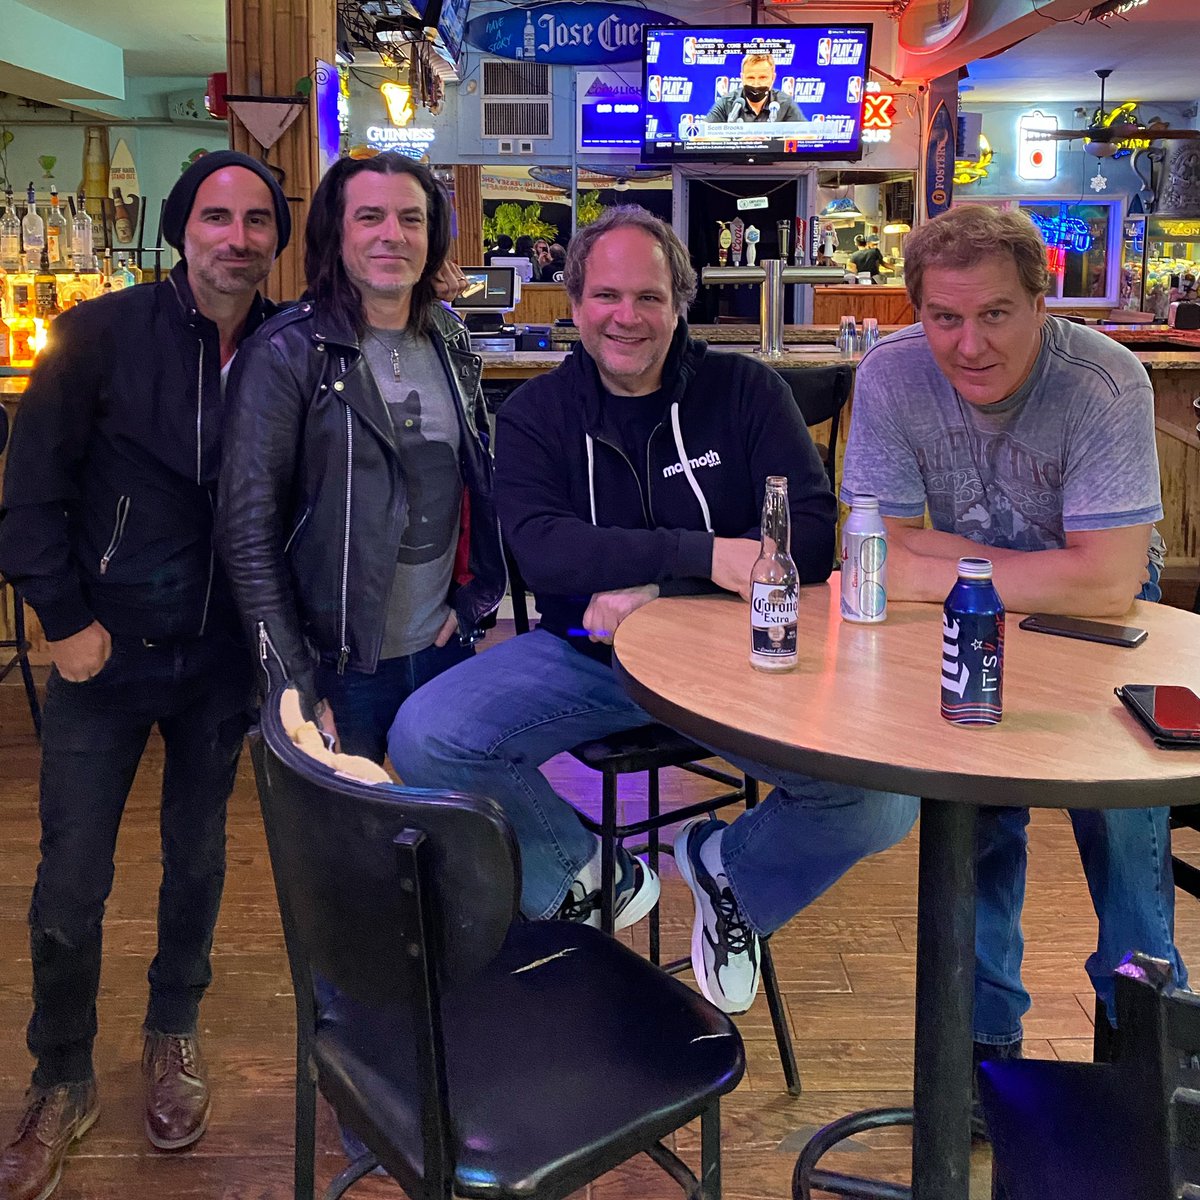 Great time at Jersey shore tonight w/old friends and fellow Jersey guys @Pjfarley1 #RachelBolan @OfficialSkidRow & @Mrjimflorentine . Fun hang catching up with everyone on the Seaside Heights boardwalk. We are starting a new supergroup called NJ Rats haha!